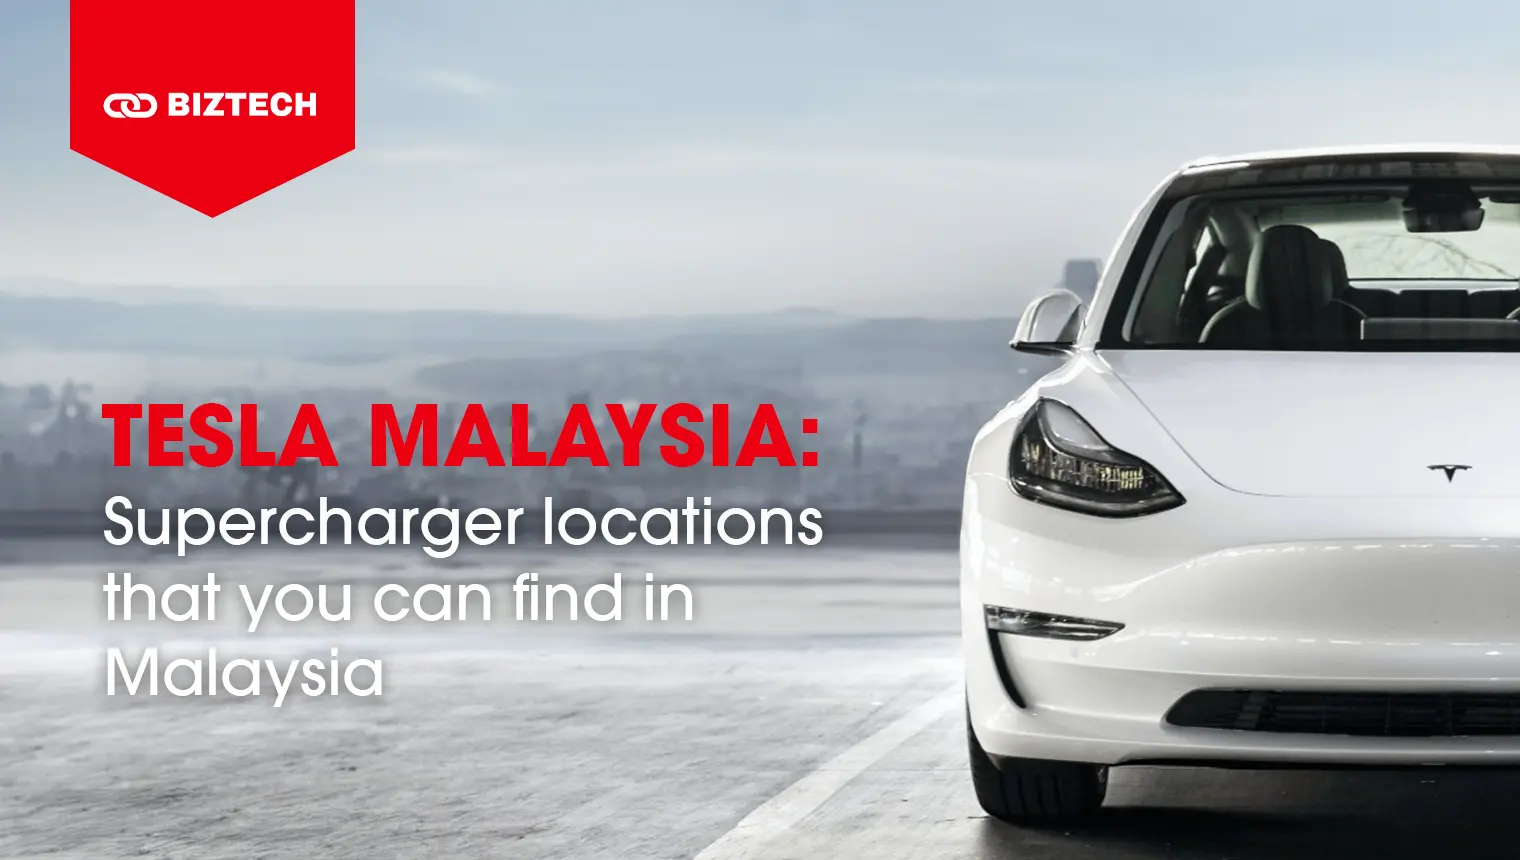 Tesla Malaysia Supercharger locations that you can find in Malaysia